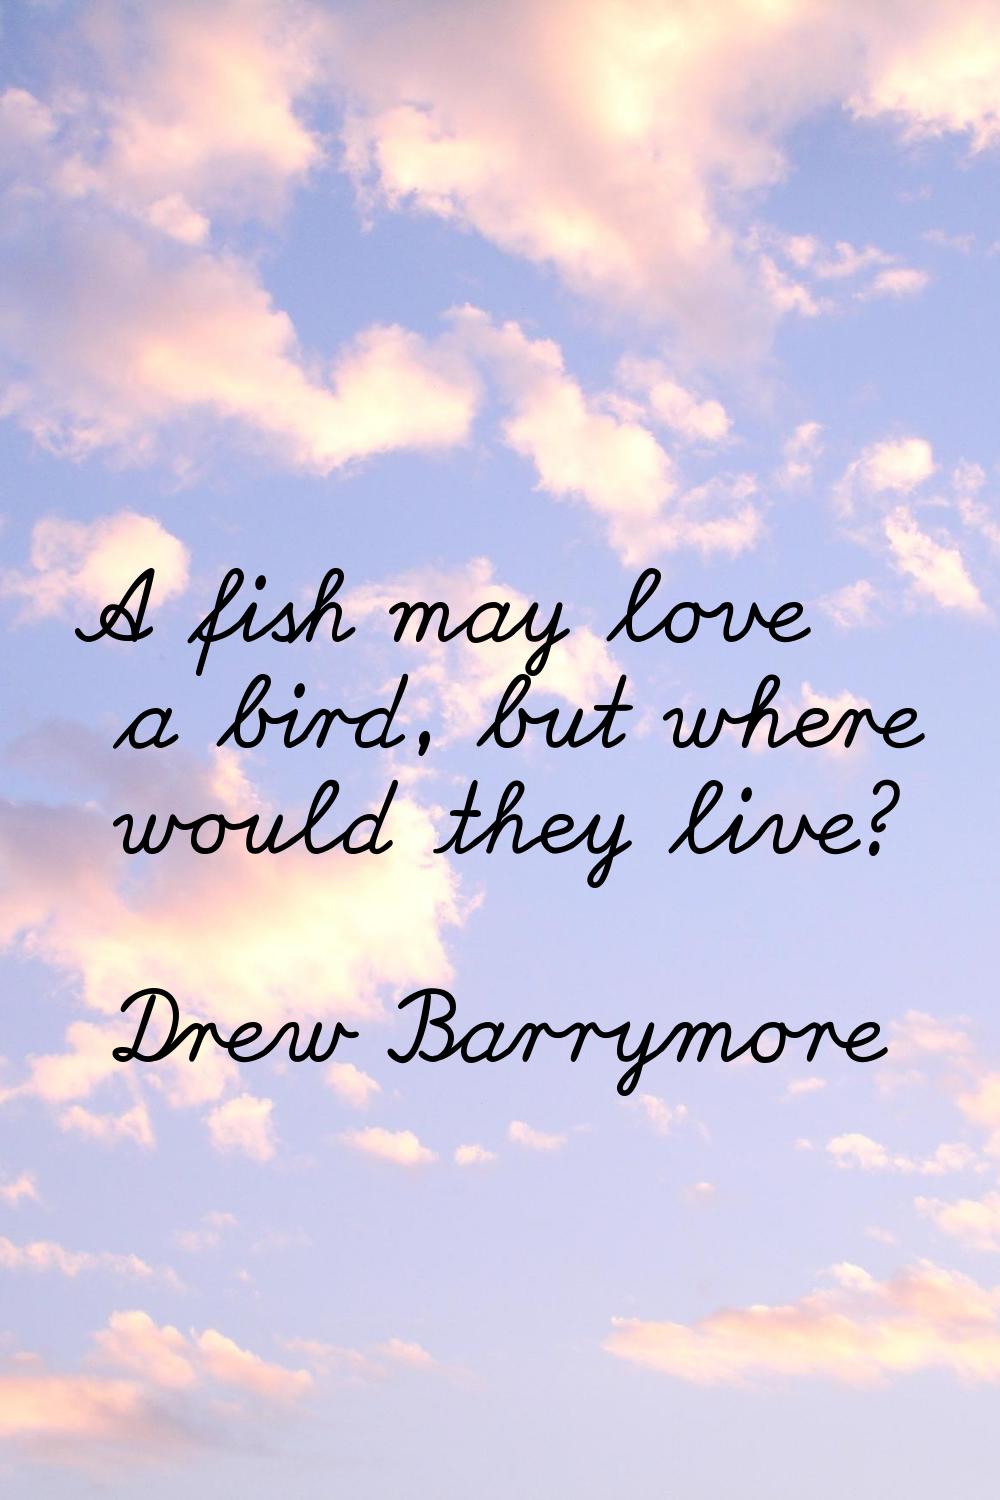 A fish may love a bird, but where would they live?